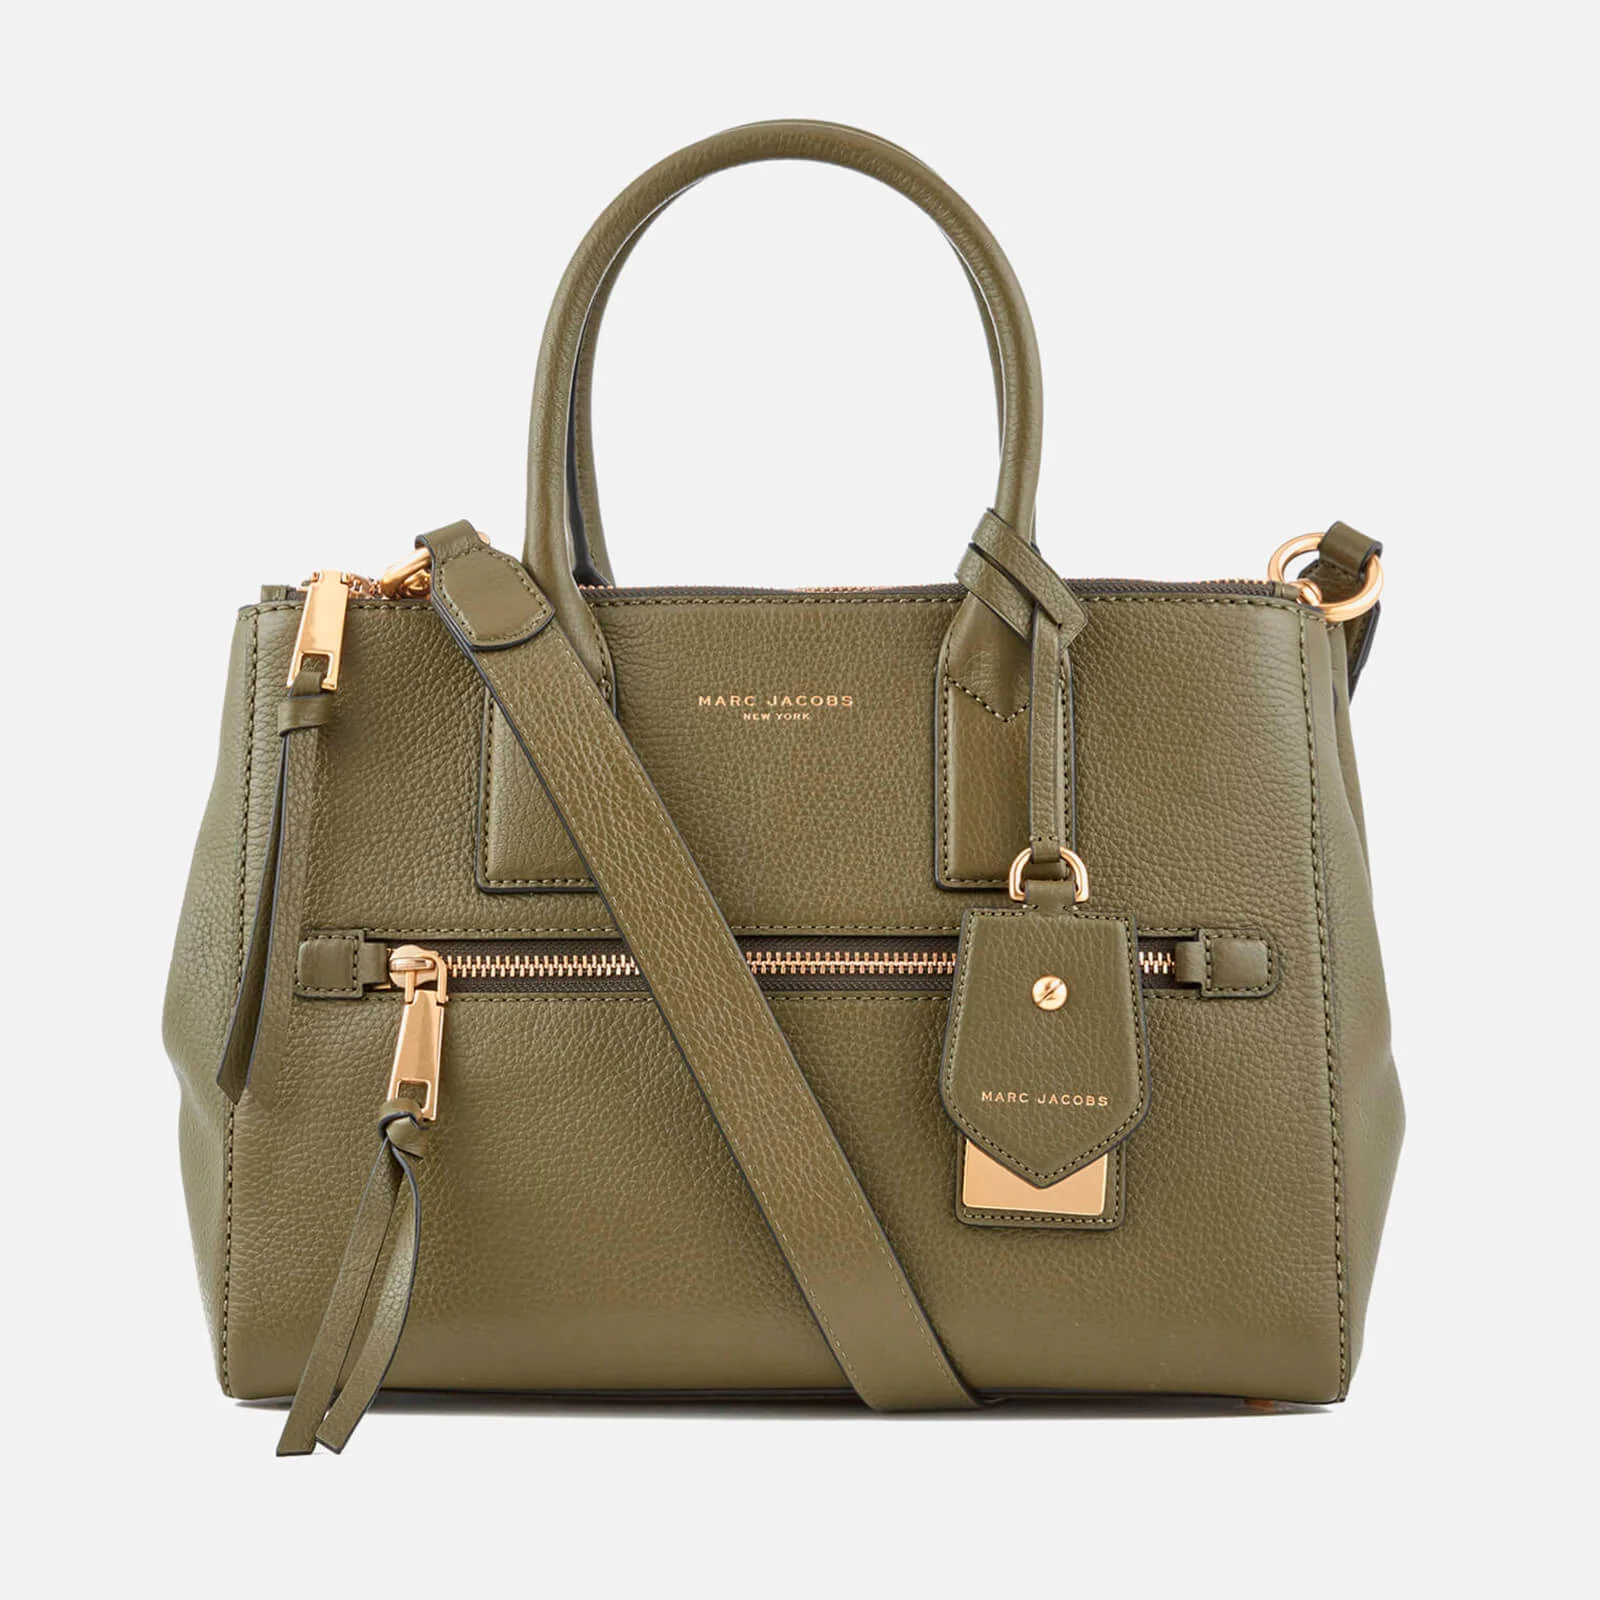 Marc Jacobs Women's Recruit East West Tote Bag - Army Green Image 1